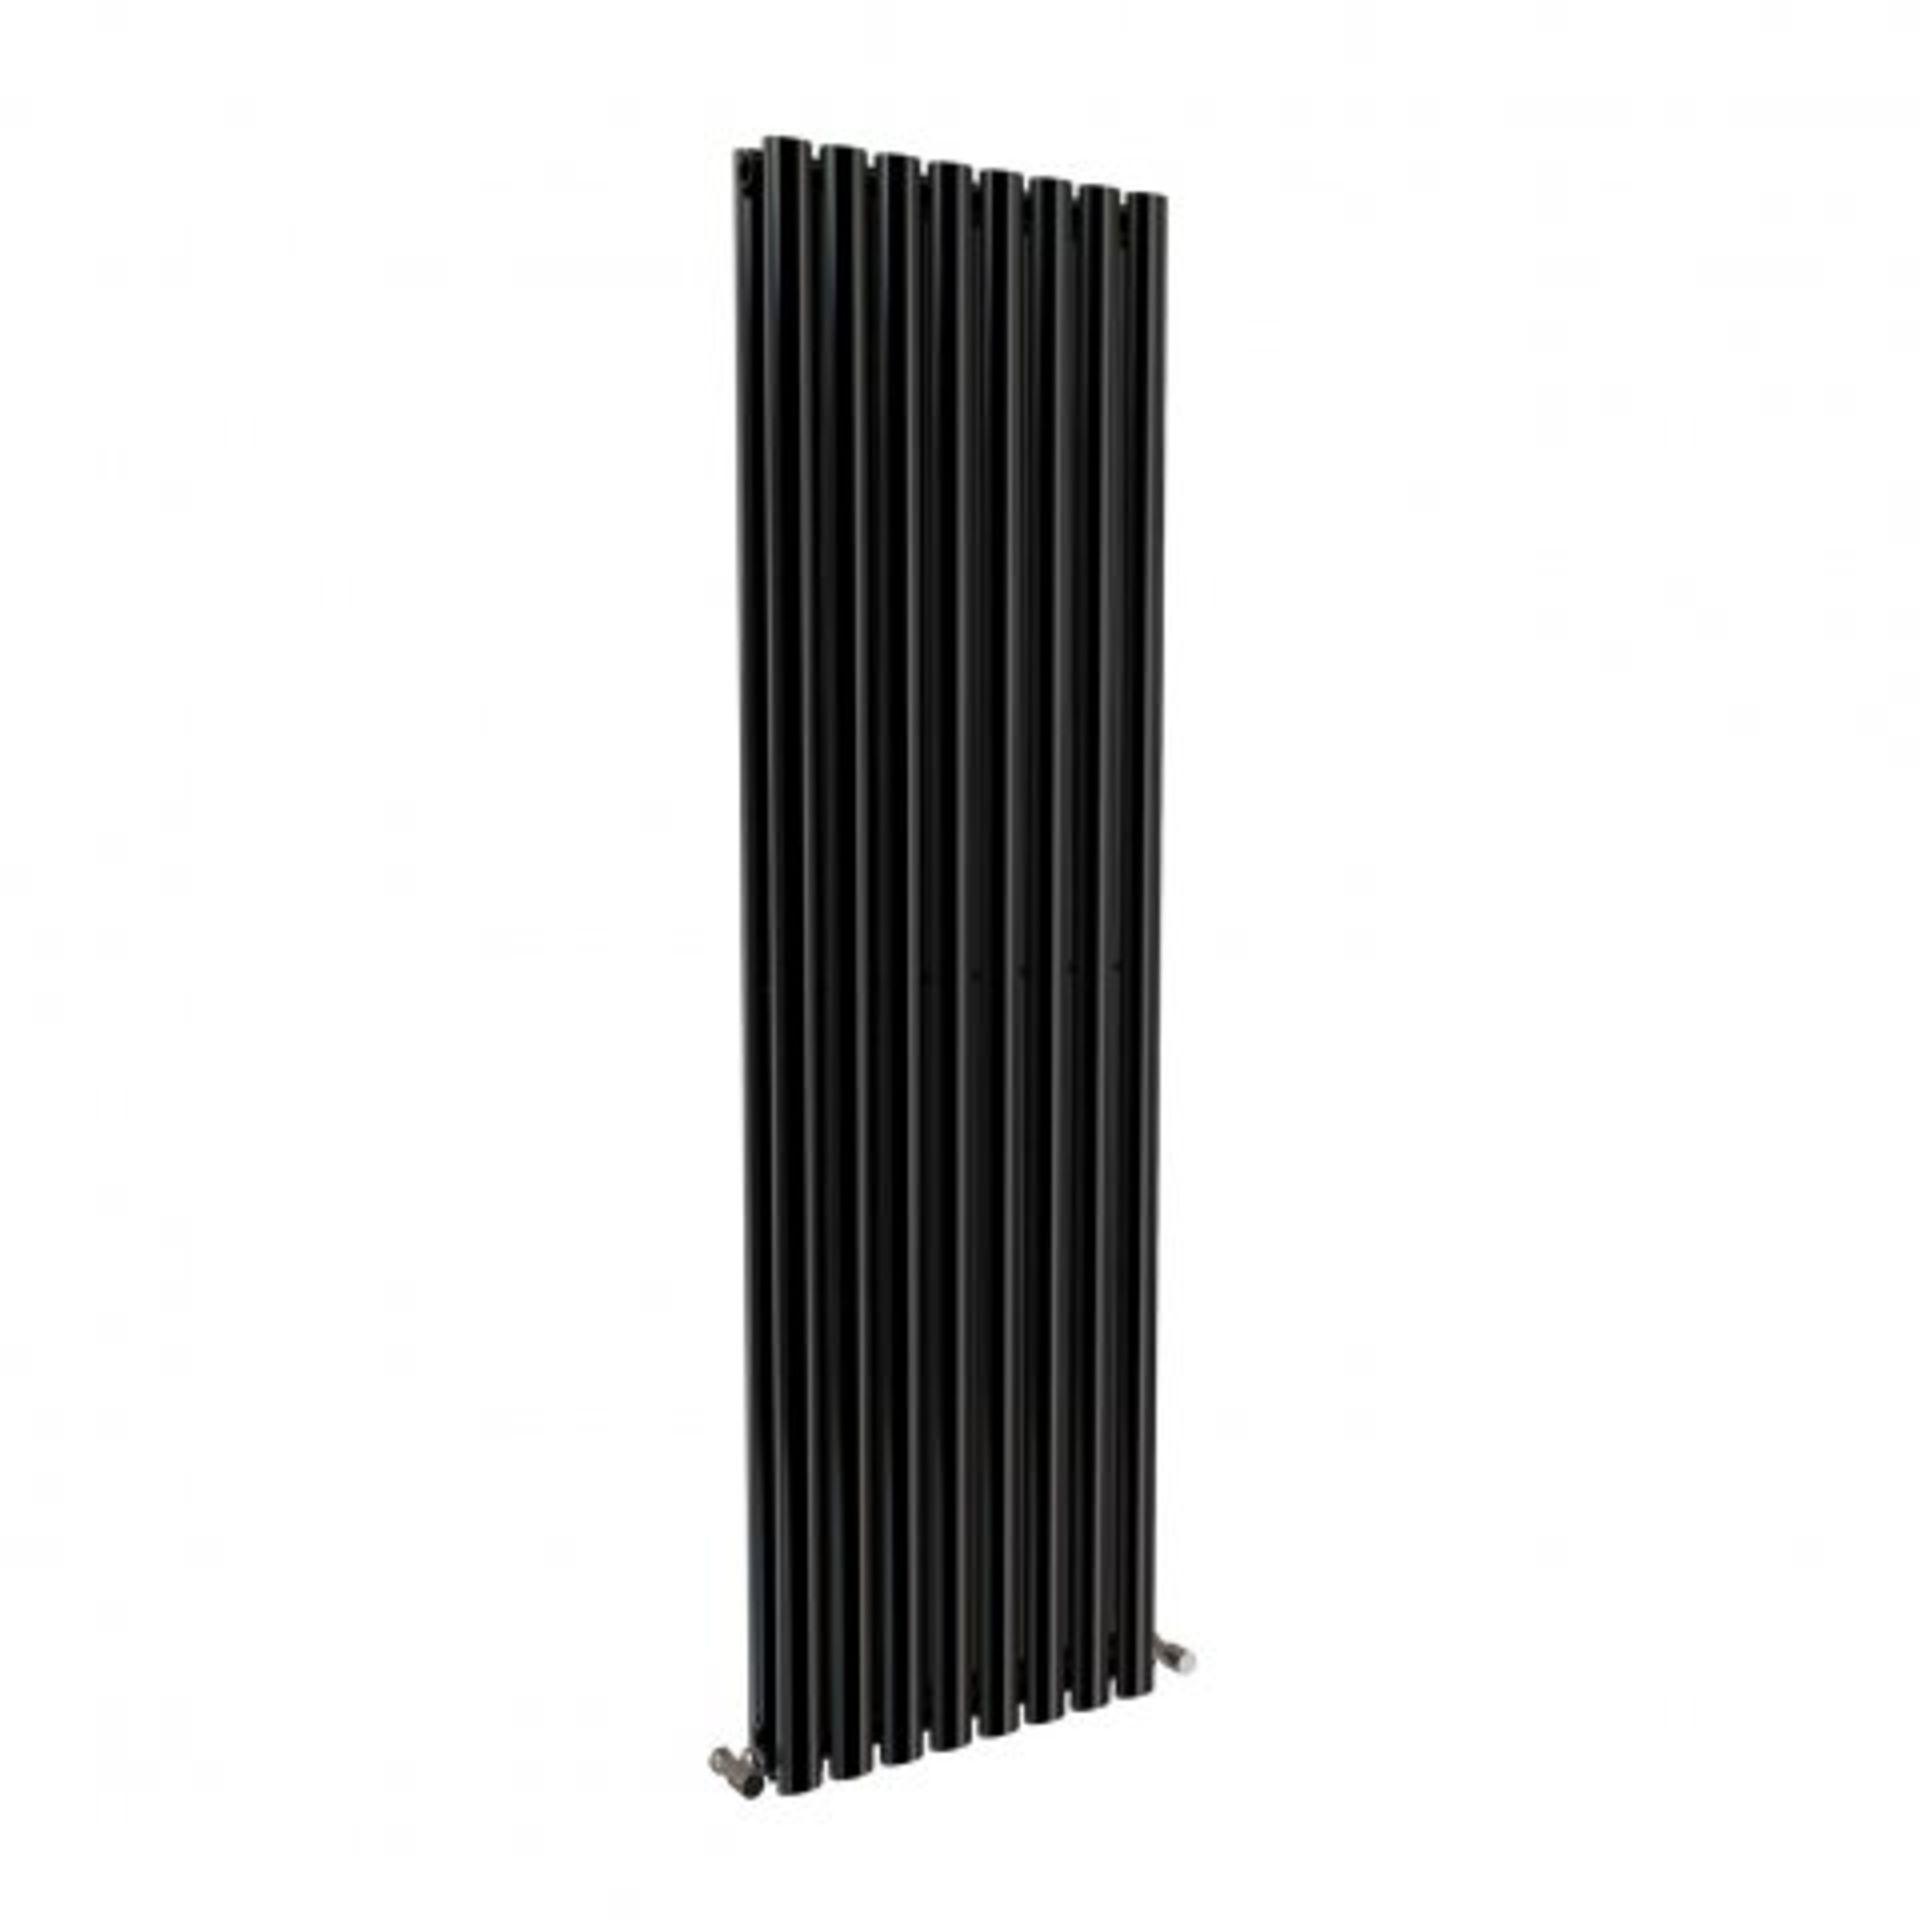 (A534) 1600x480mm Black Double Oval Tube Vertical Radiator - Ember Premium. RRP £351.98. Want to add - Image 2 of 4